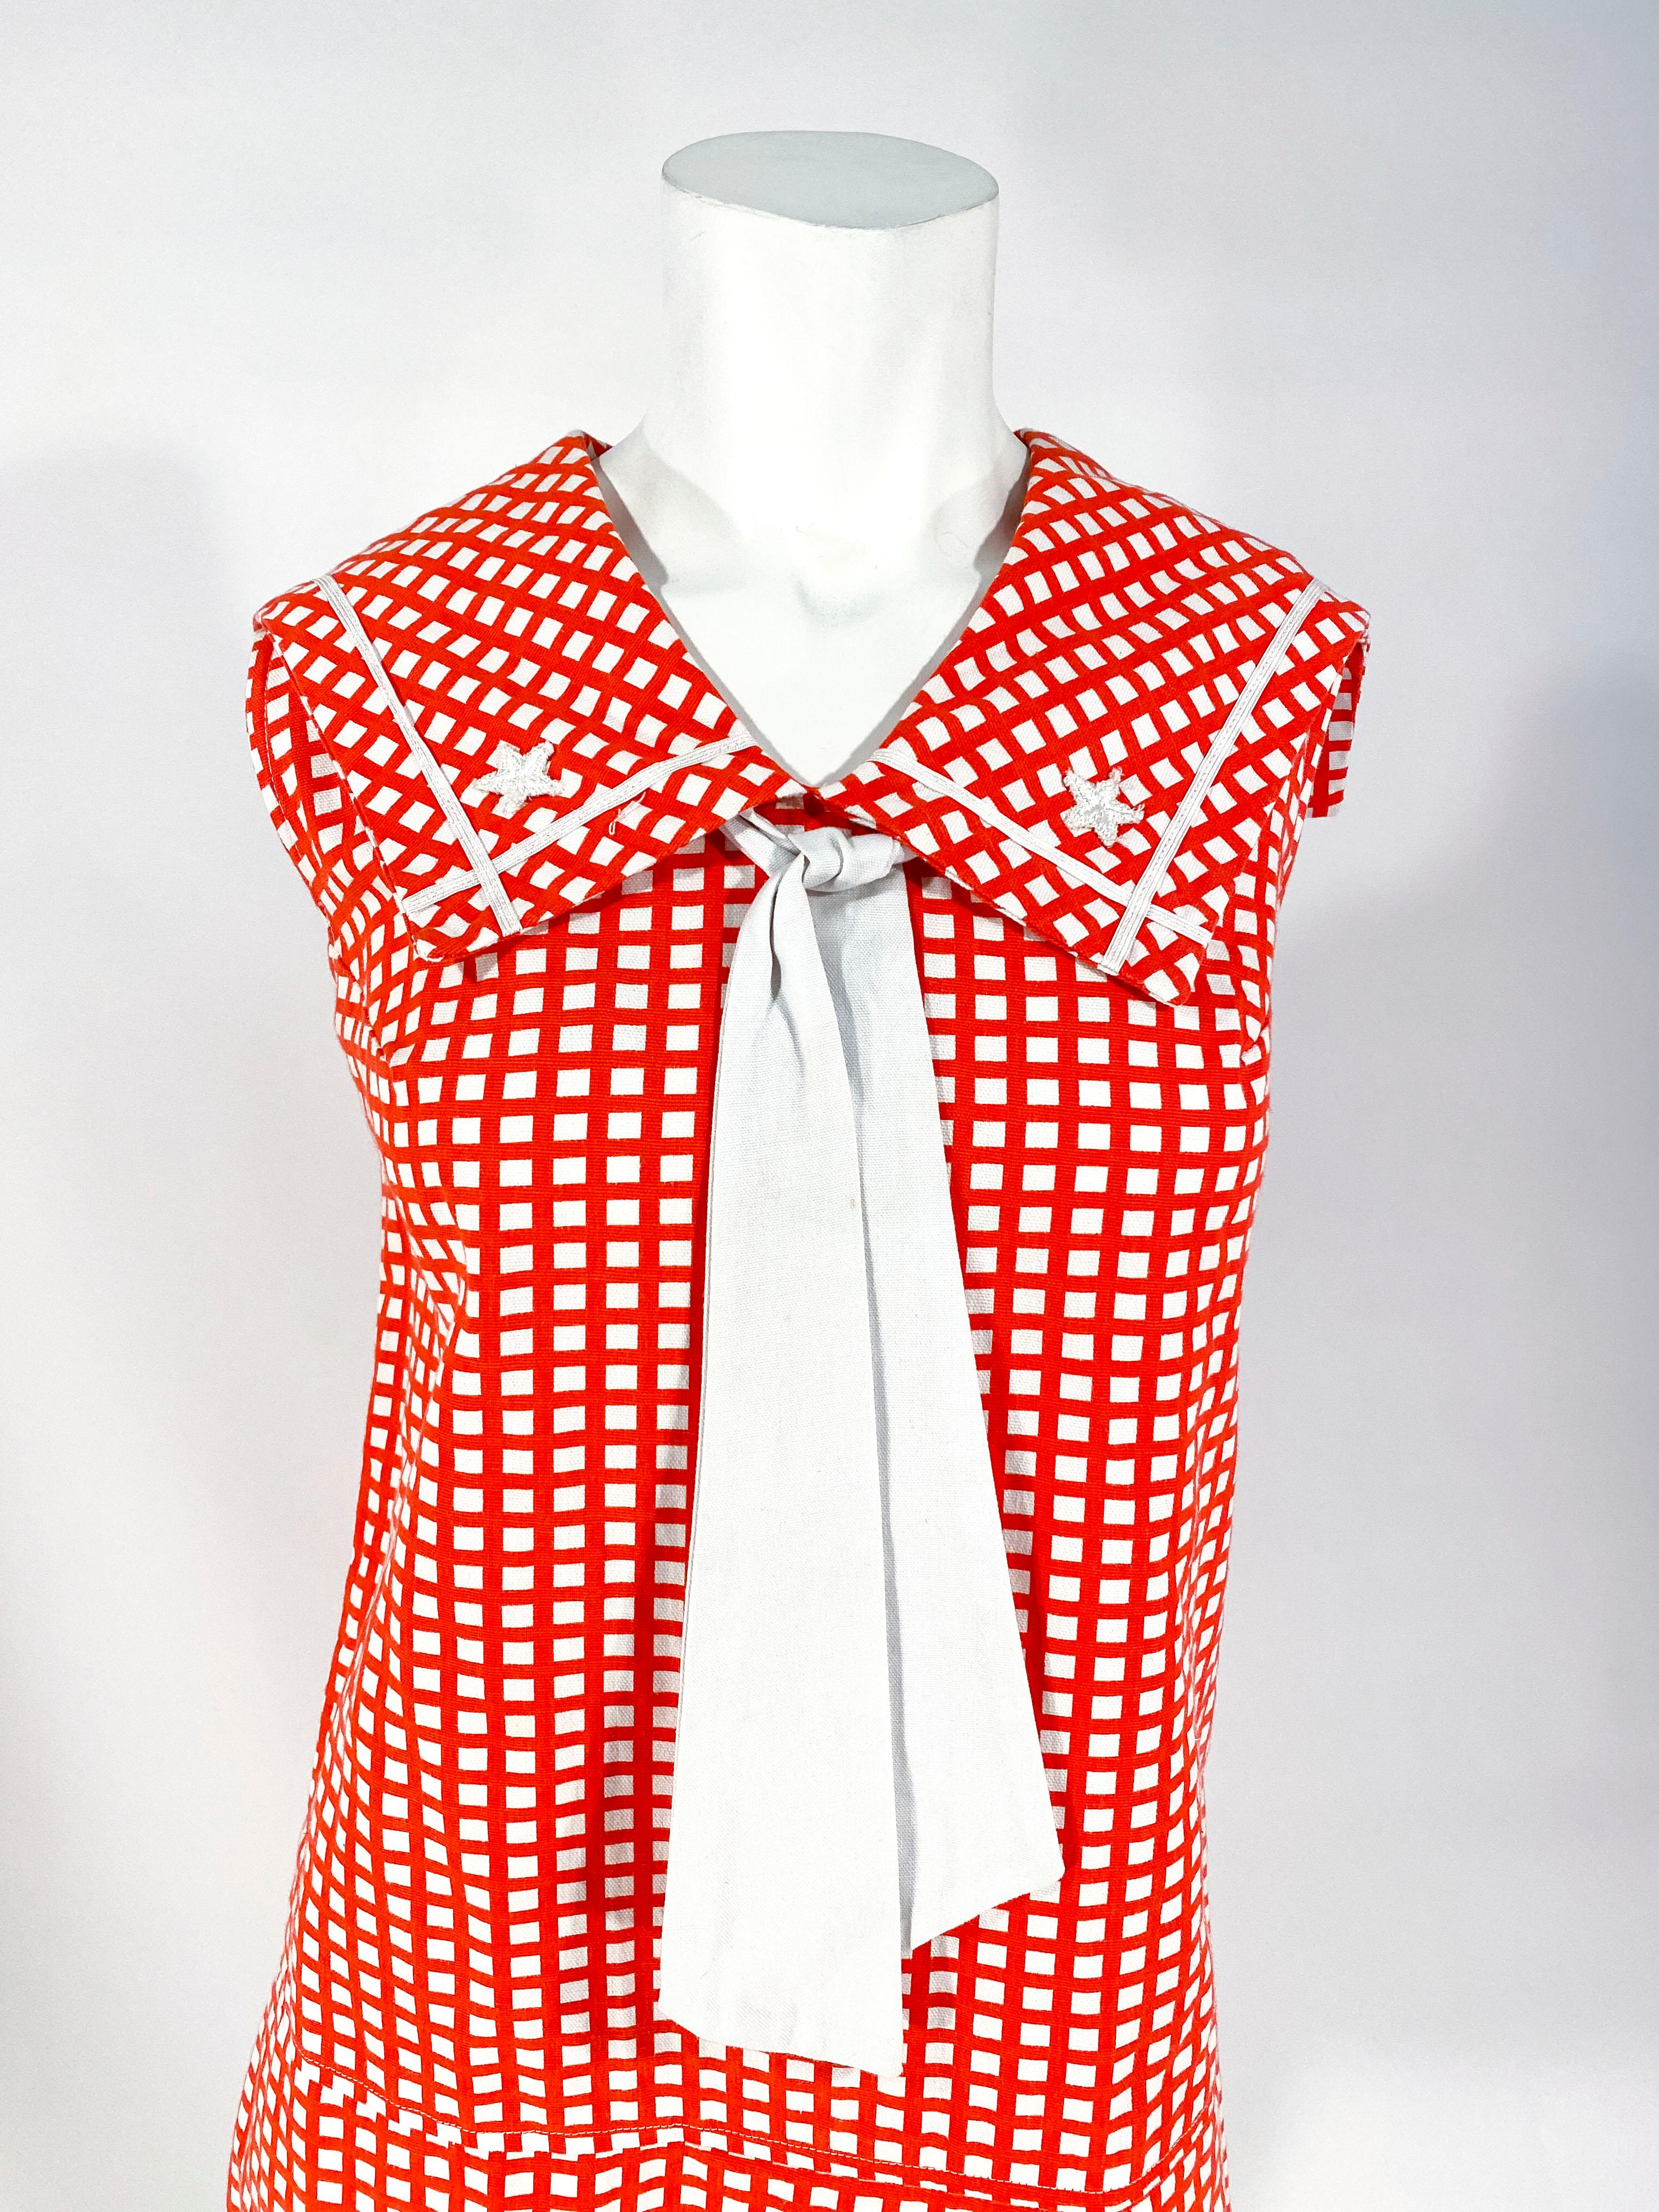 1960s soft red and white printed cotton skort dress with large pleats that hide the shorts of the skort, windowpane pattern, sailor collar decorated with soutache trim and embroidered stars, finished with a white cotton sailor tie. The back has a